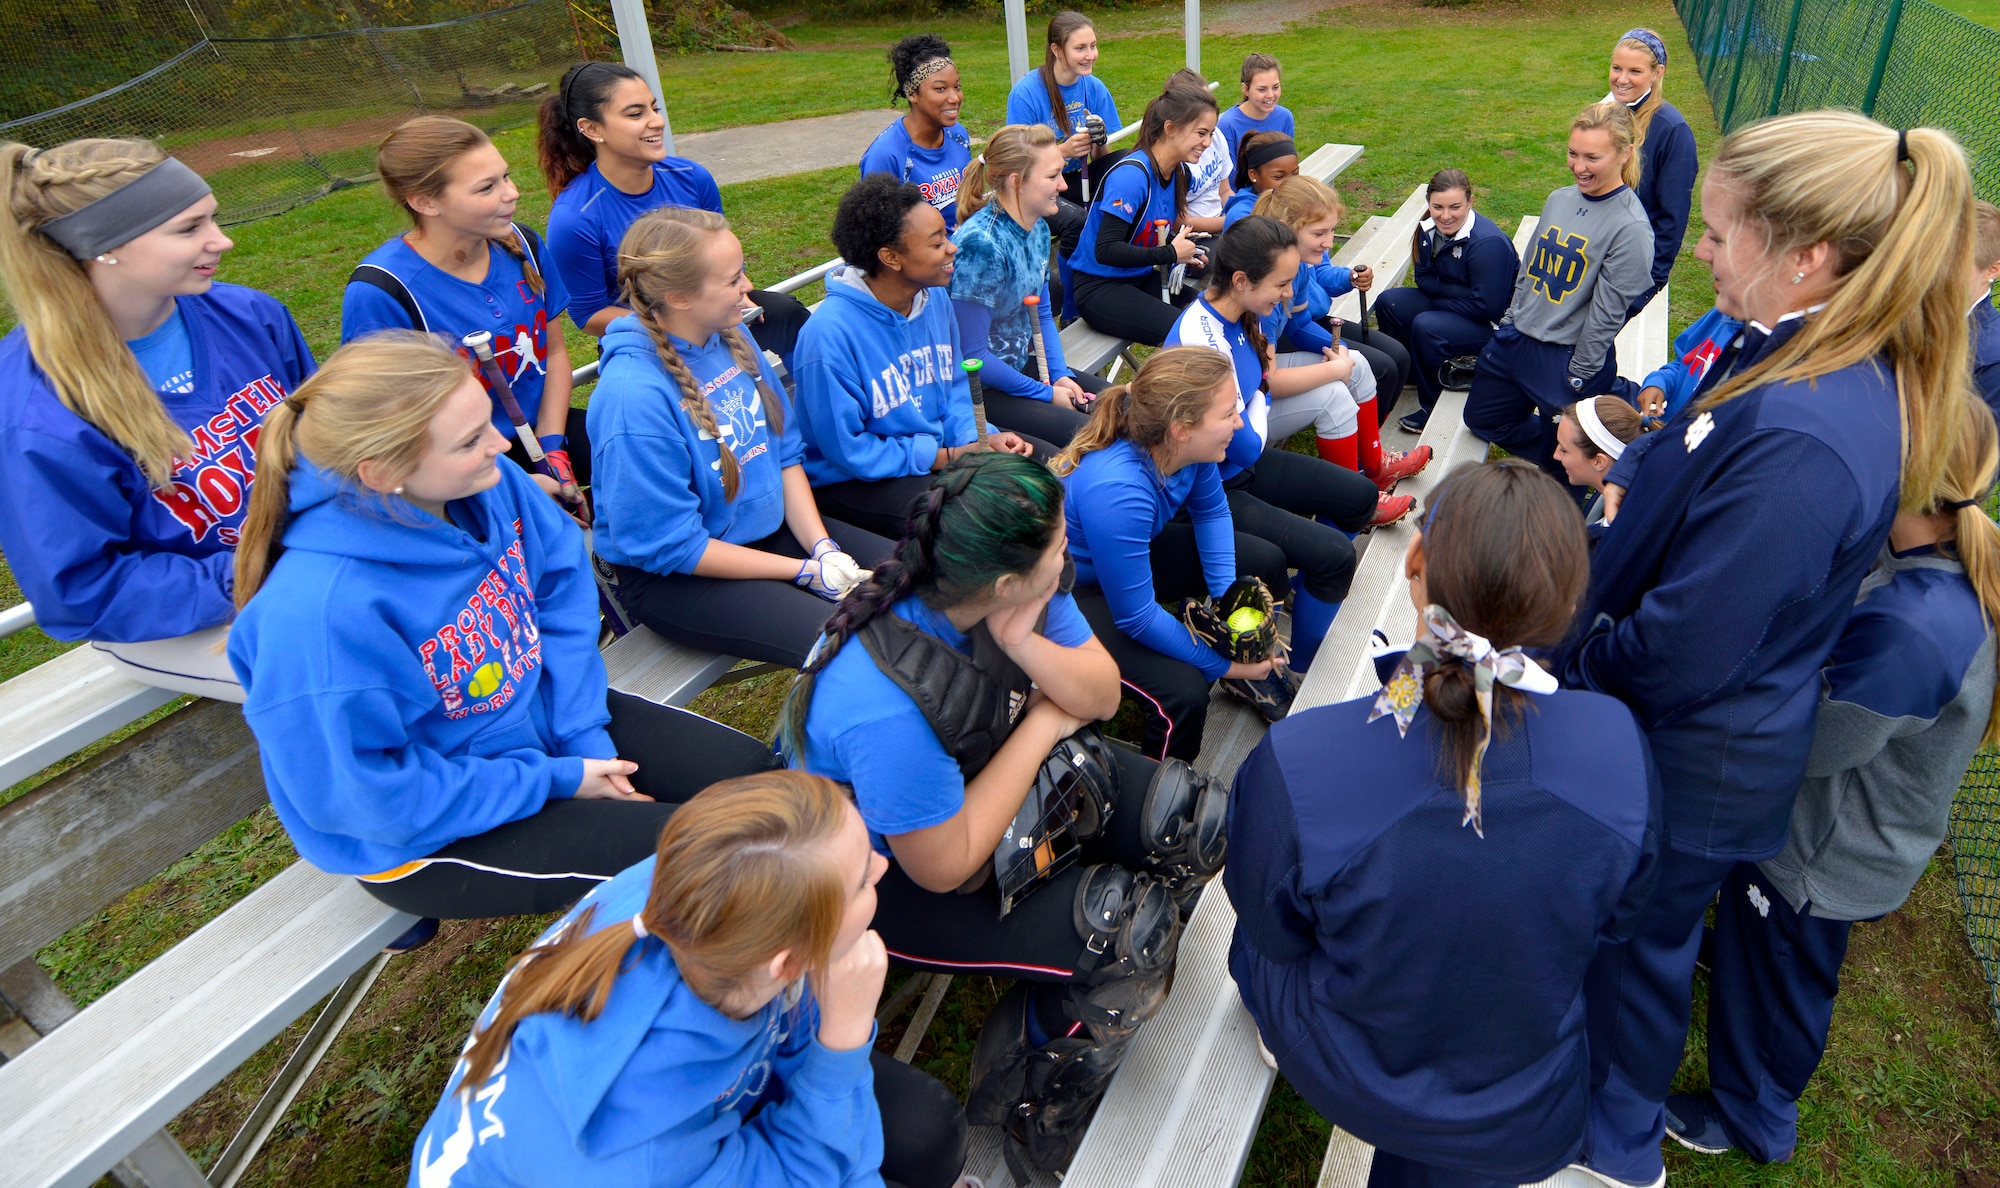 Members of the University of Notre Dame softball team answer questions from the Ramstein High School Royals varsity softball team Oct. 21, 2015, at Ramstein Air Base, Germany. Notre Dame softball team members visited Ramstein Air Base during their 10-day European tour. The tour included softball instructional clinics in which Notre Dame players helped the high school players with offensive and defensive softball skills. (U.S. Air Force photo/Staff Sgt. Sharida Jackson)